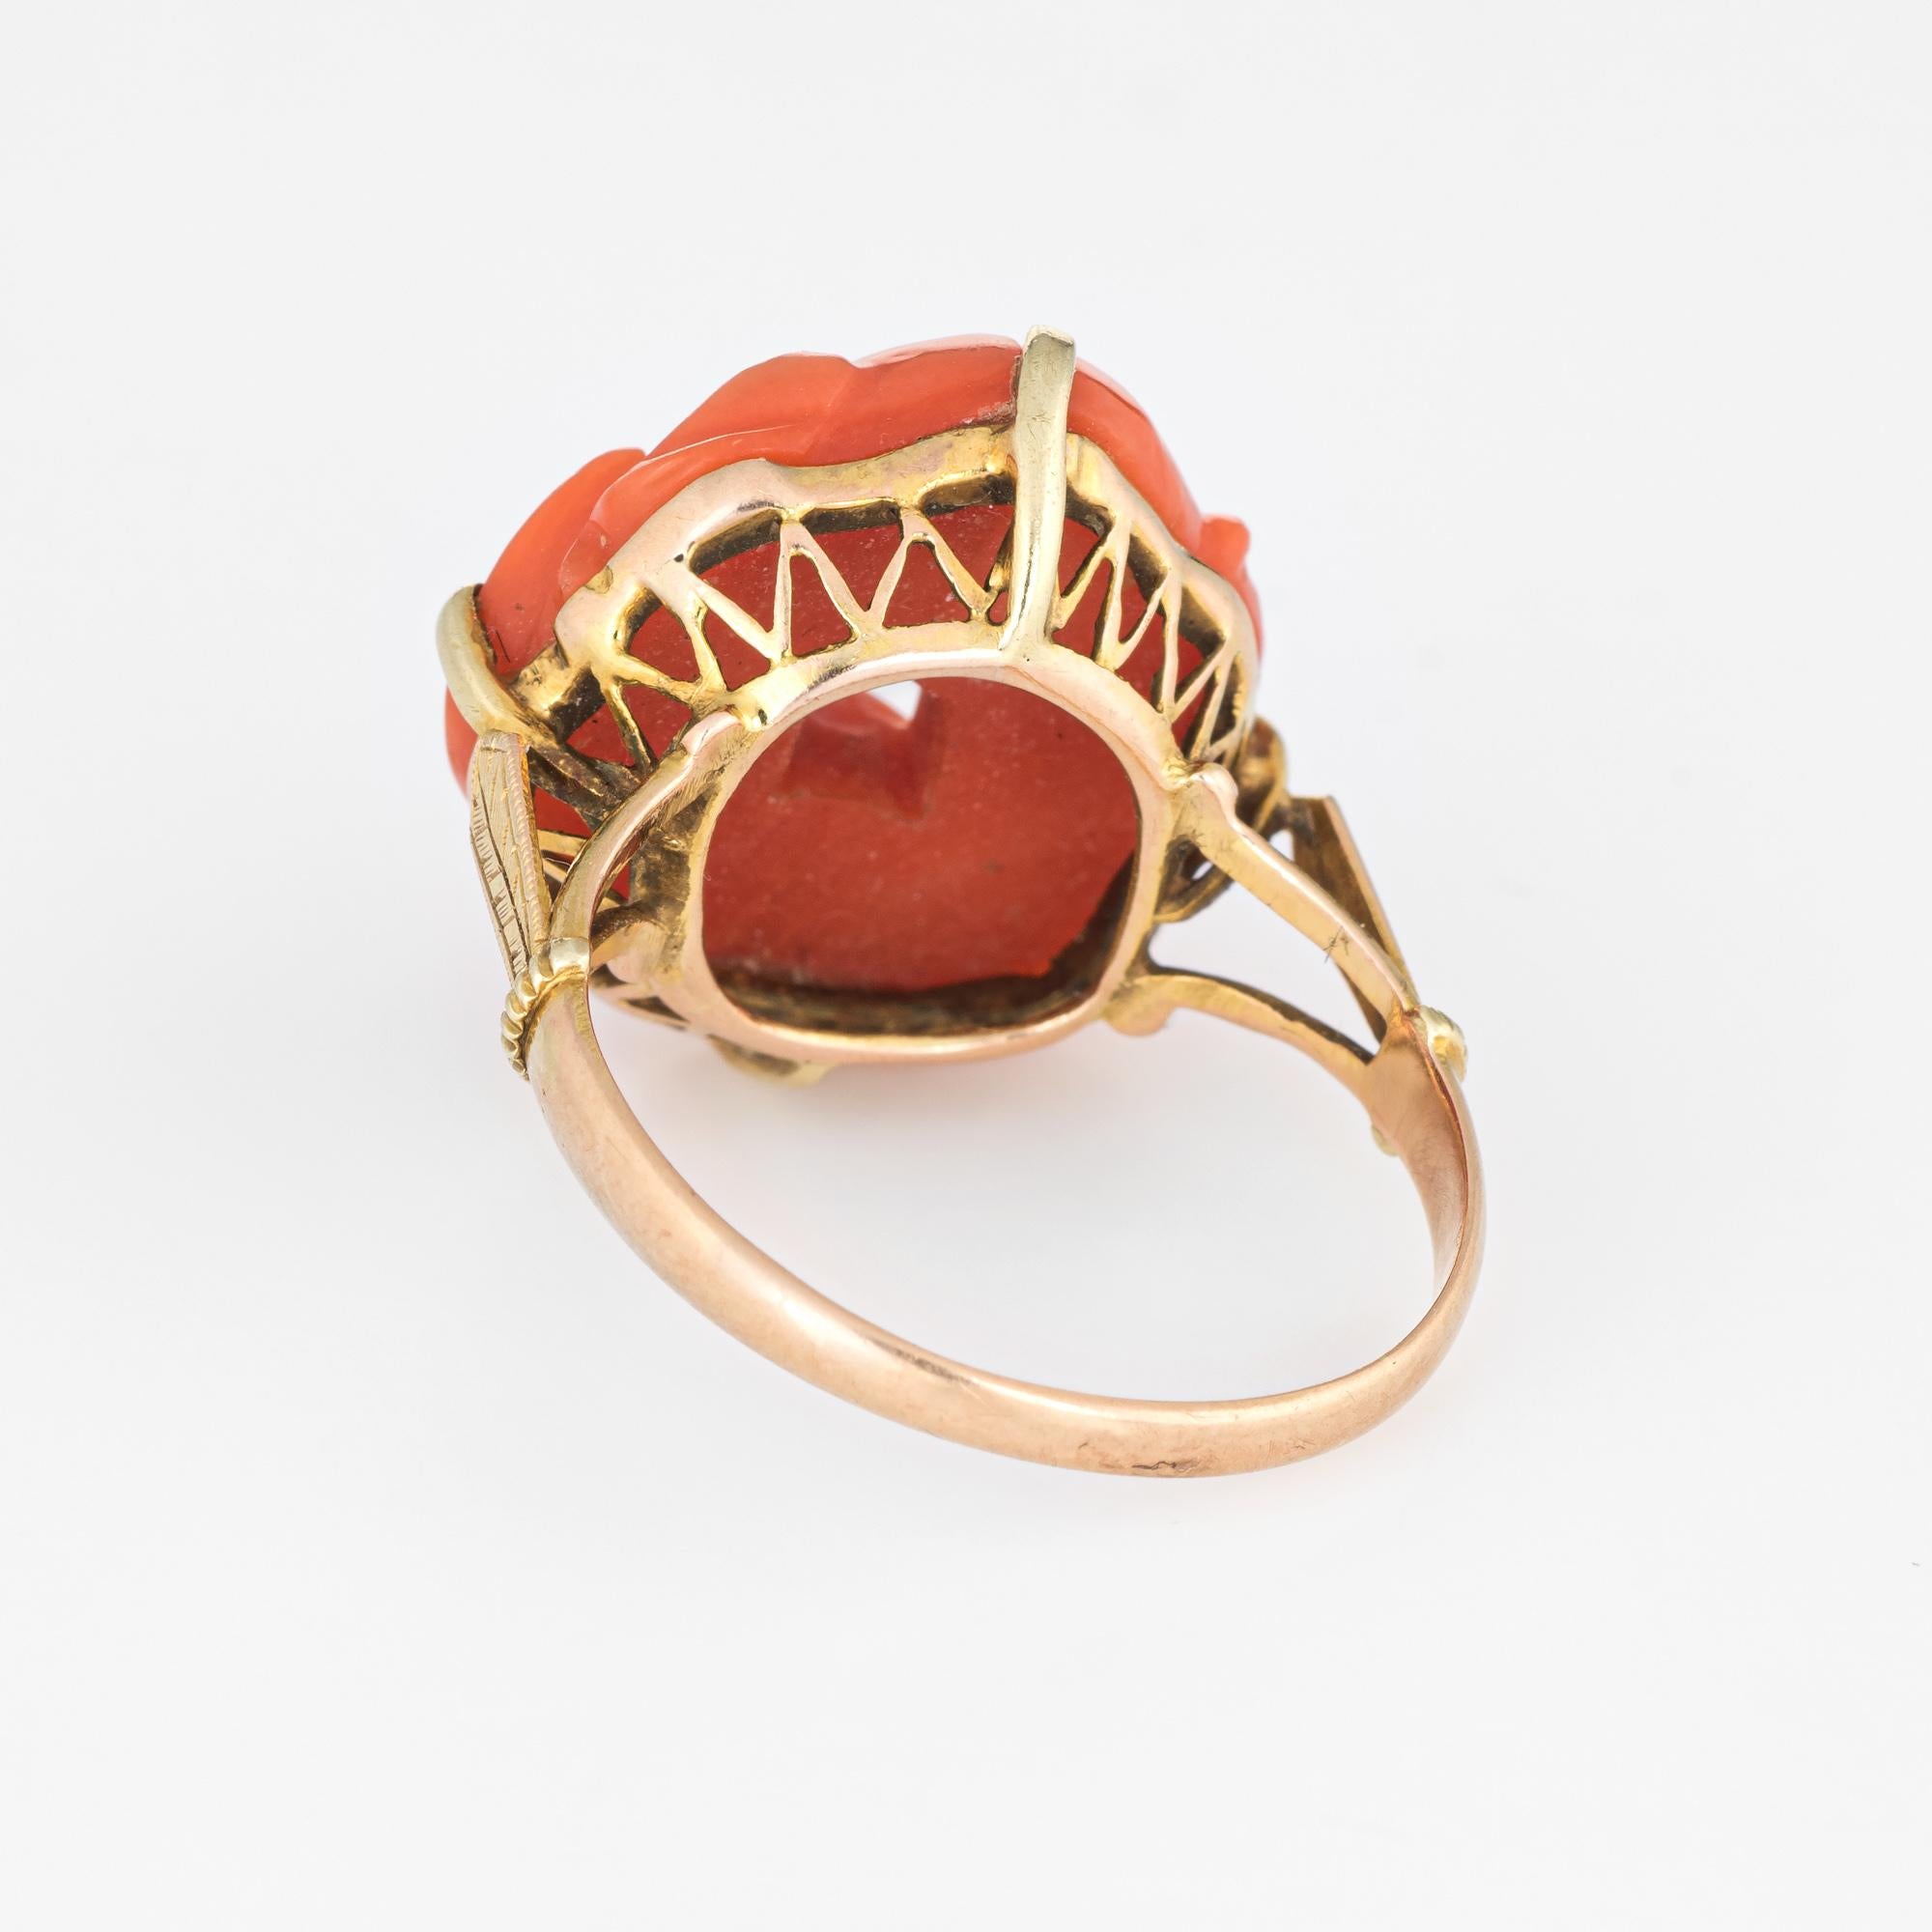 Modern Vintage Carved Coral Ring 14 Karat Gold Good Luck Happiness Estate Jewelry